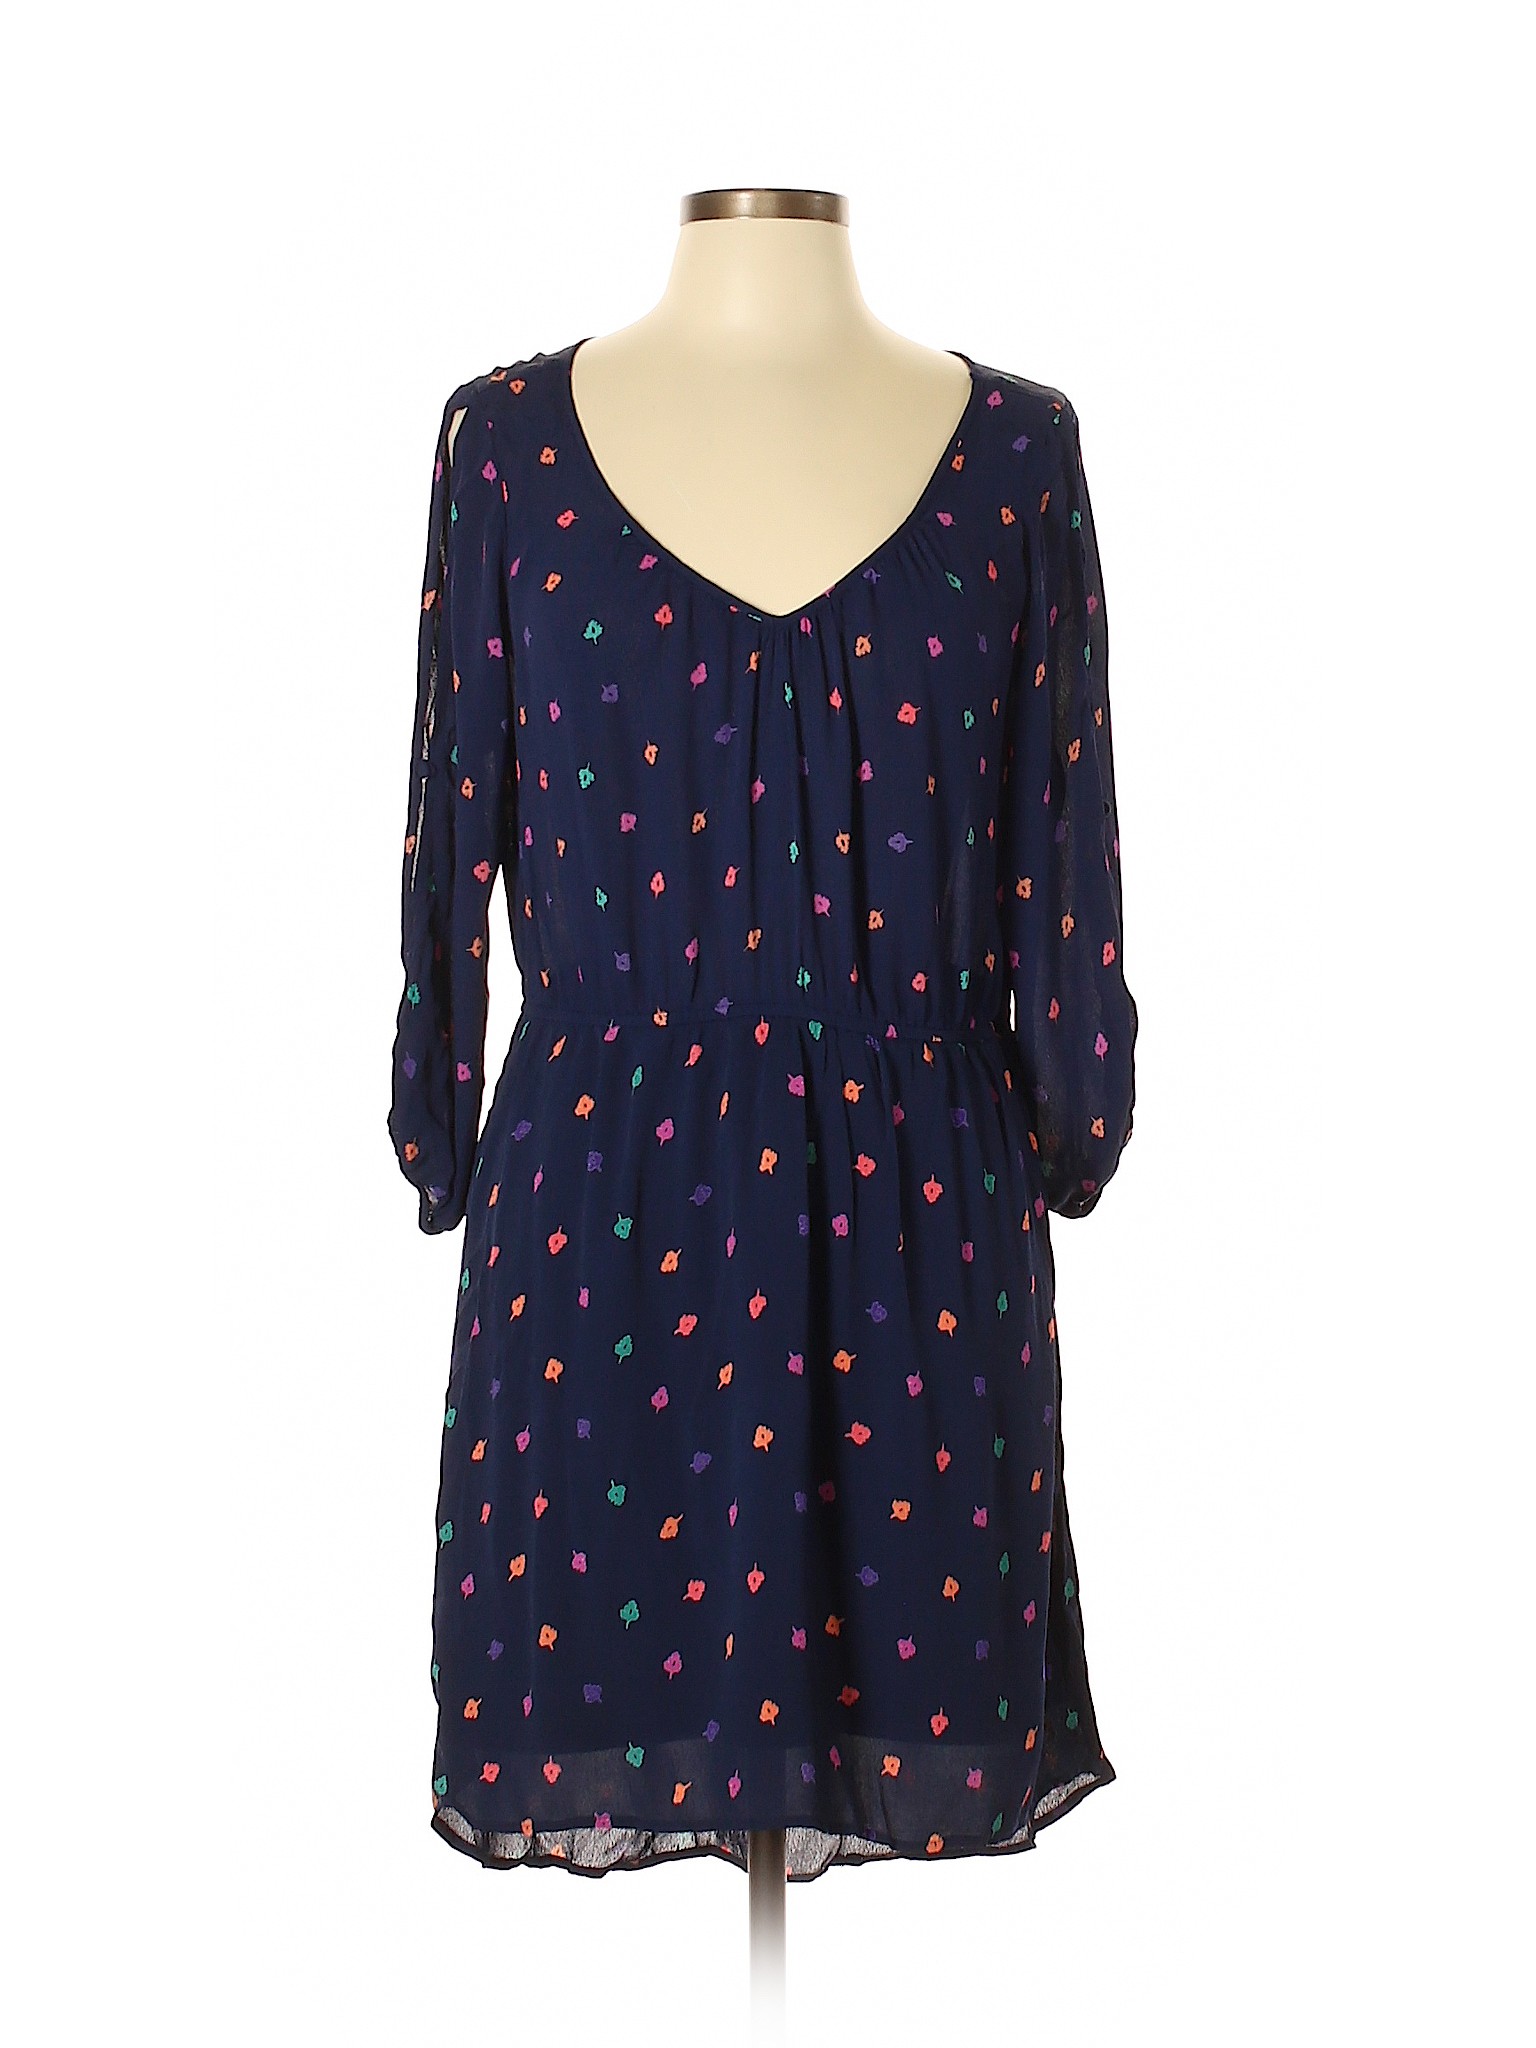 American Eagle Outfitters Women Blue Casual Dress Lg | eBay